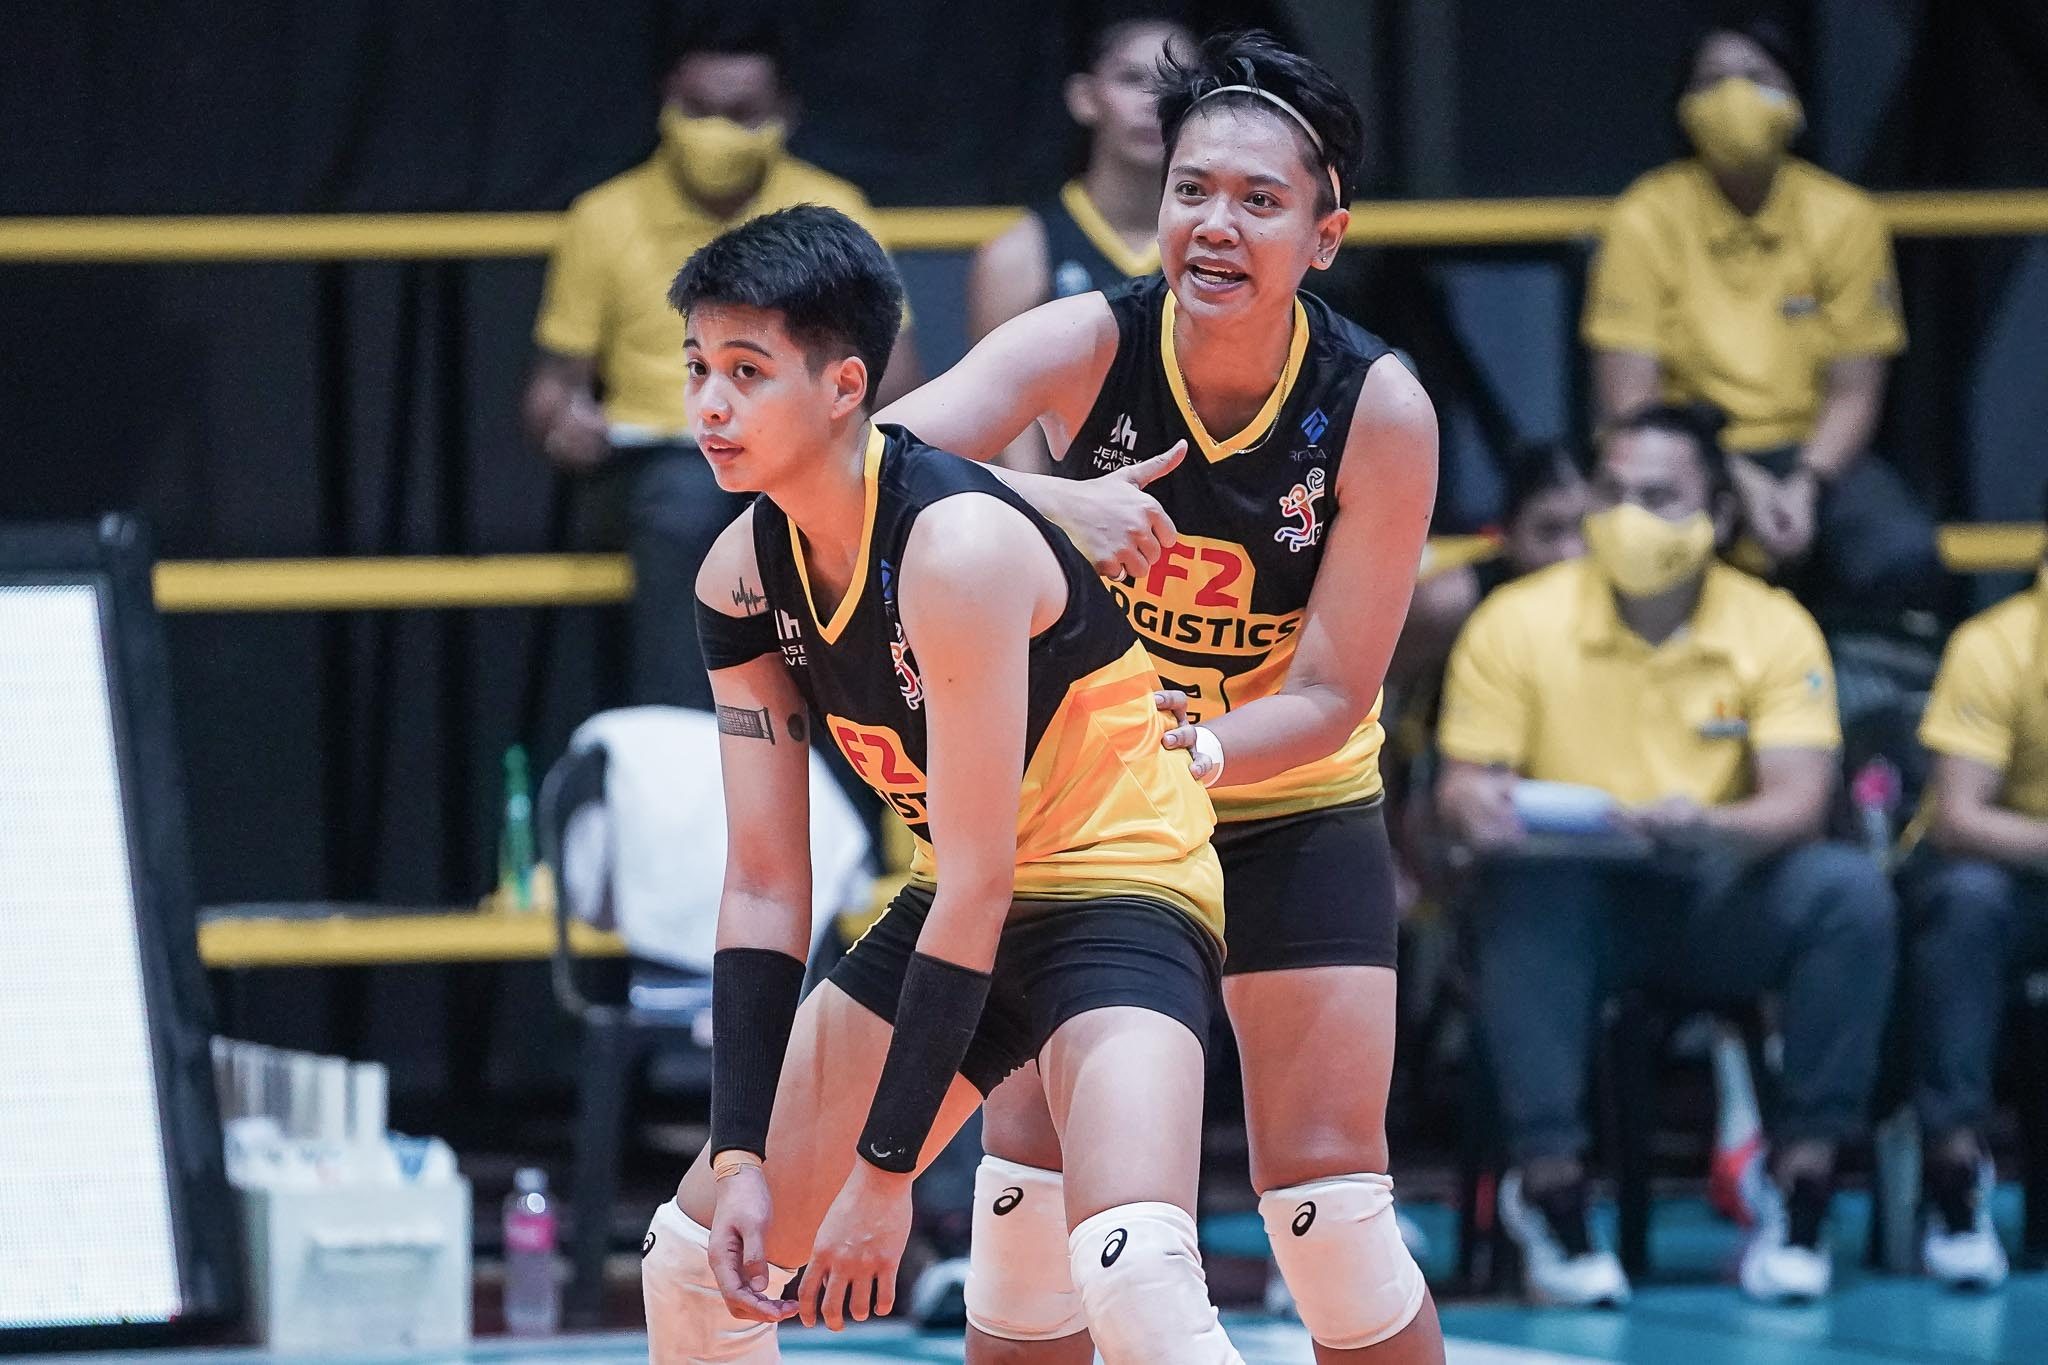 Returning Kim Fajardo tempers self-expectations after two-year layoff